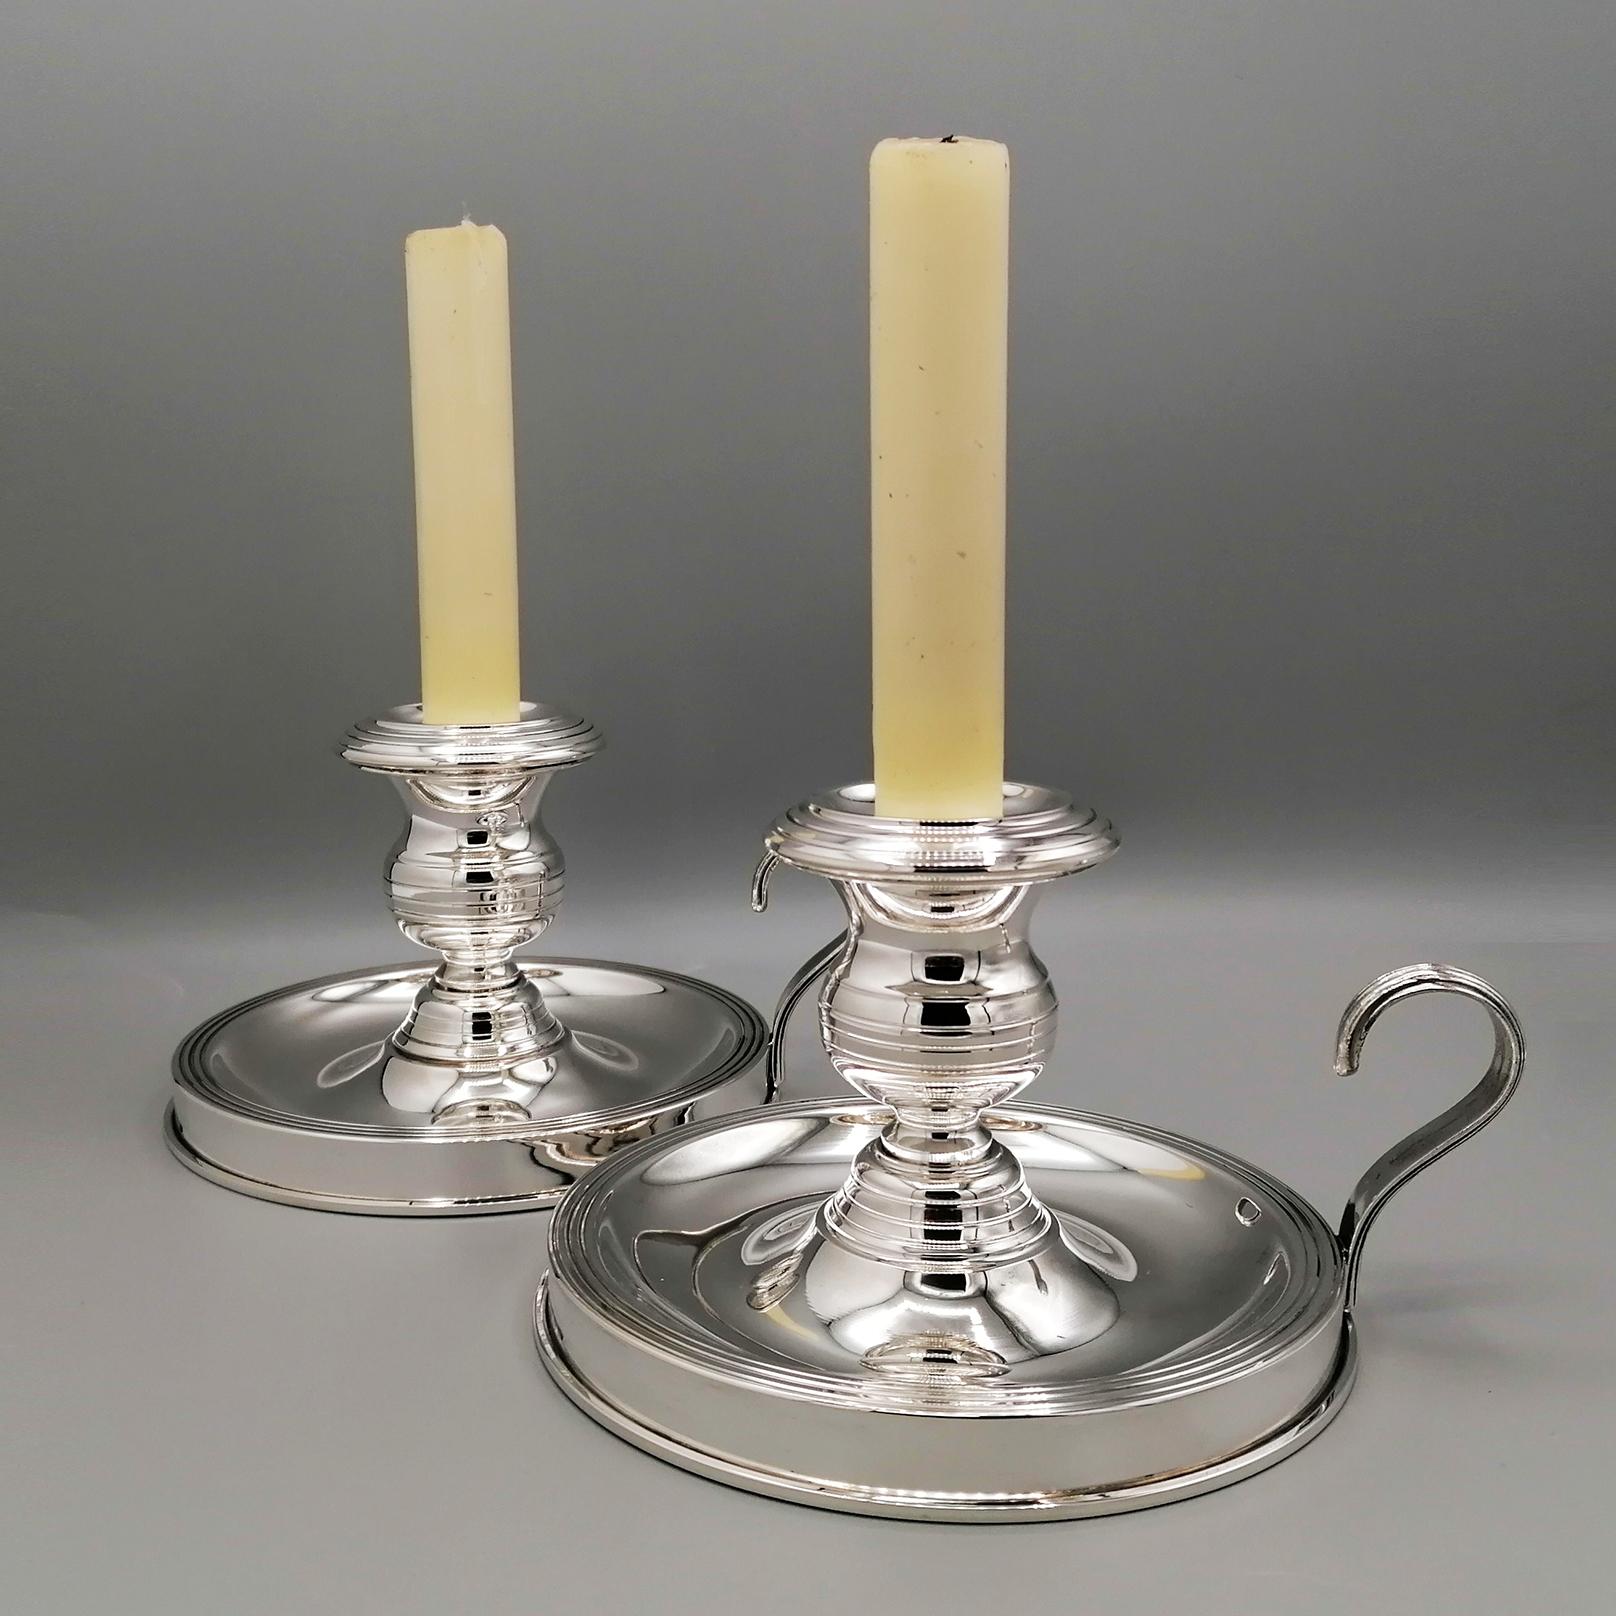 XX° Century Italian Sterling Silver Pair of Chamberscticks For Sale 4